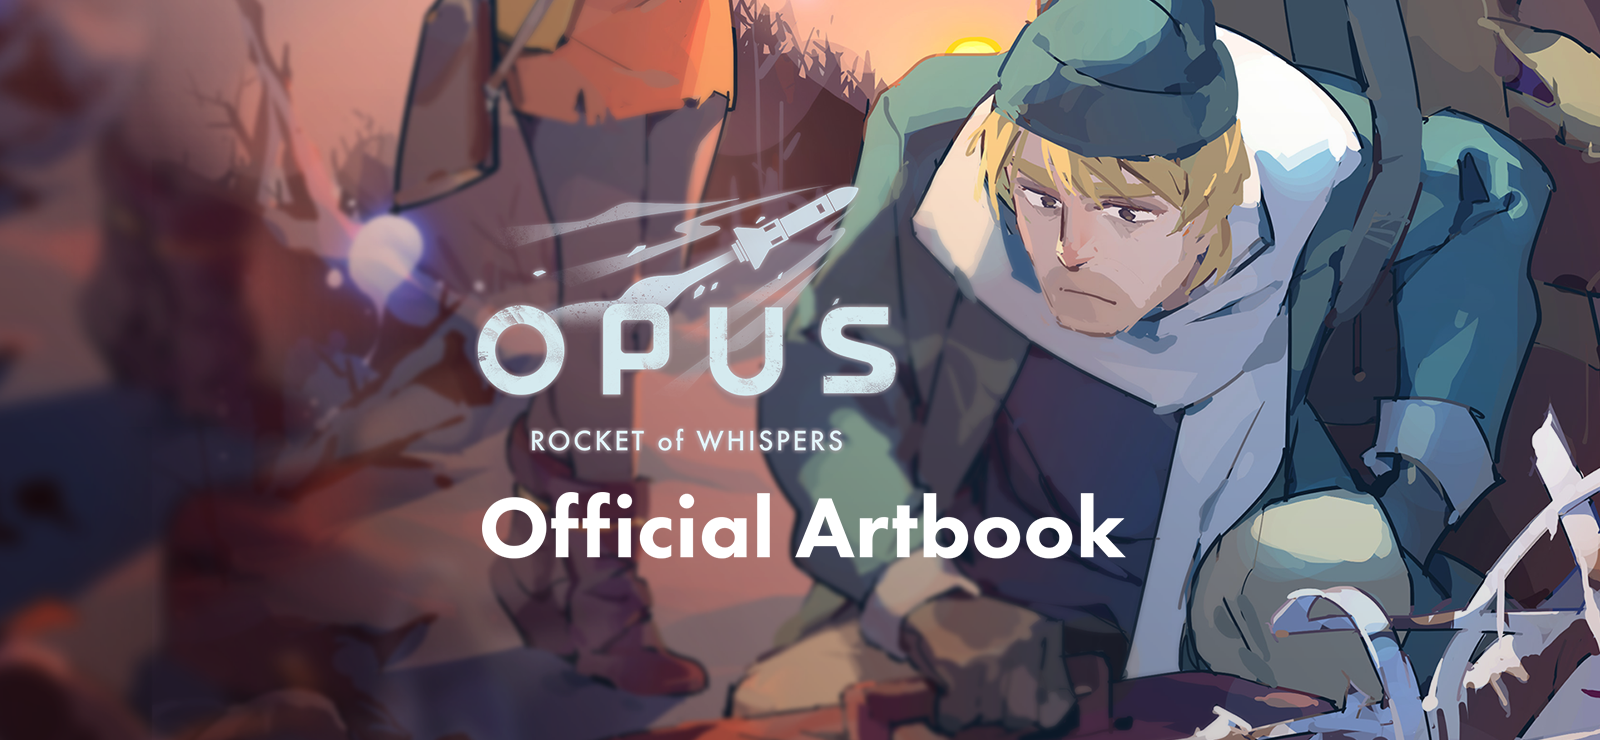 OPUS: Rocket Of Whispers - Official Artbook